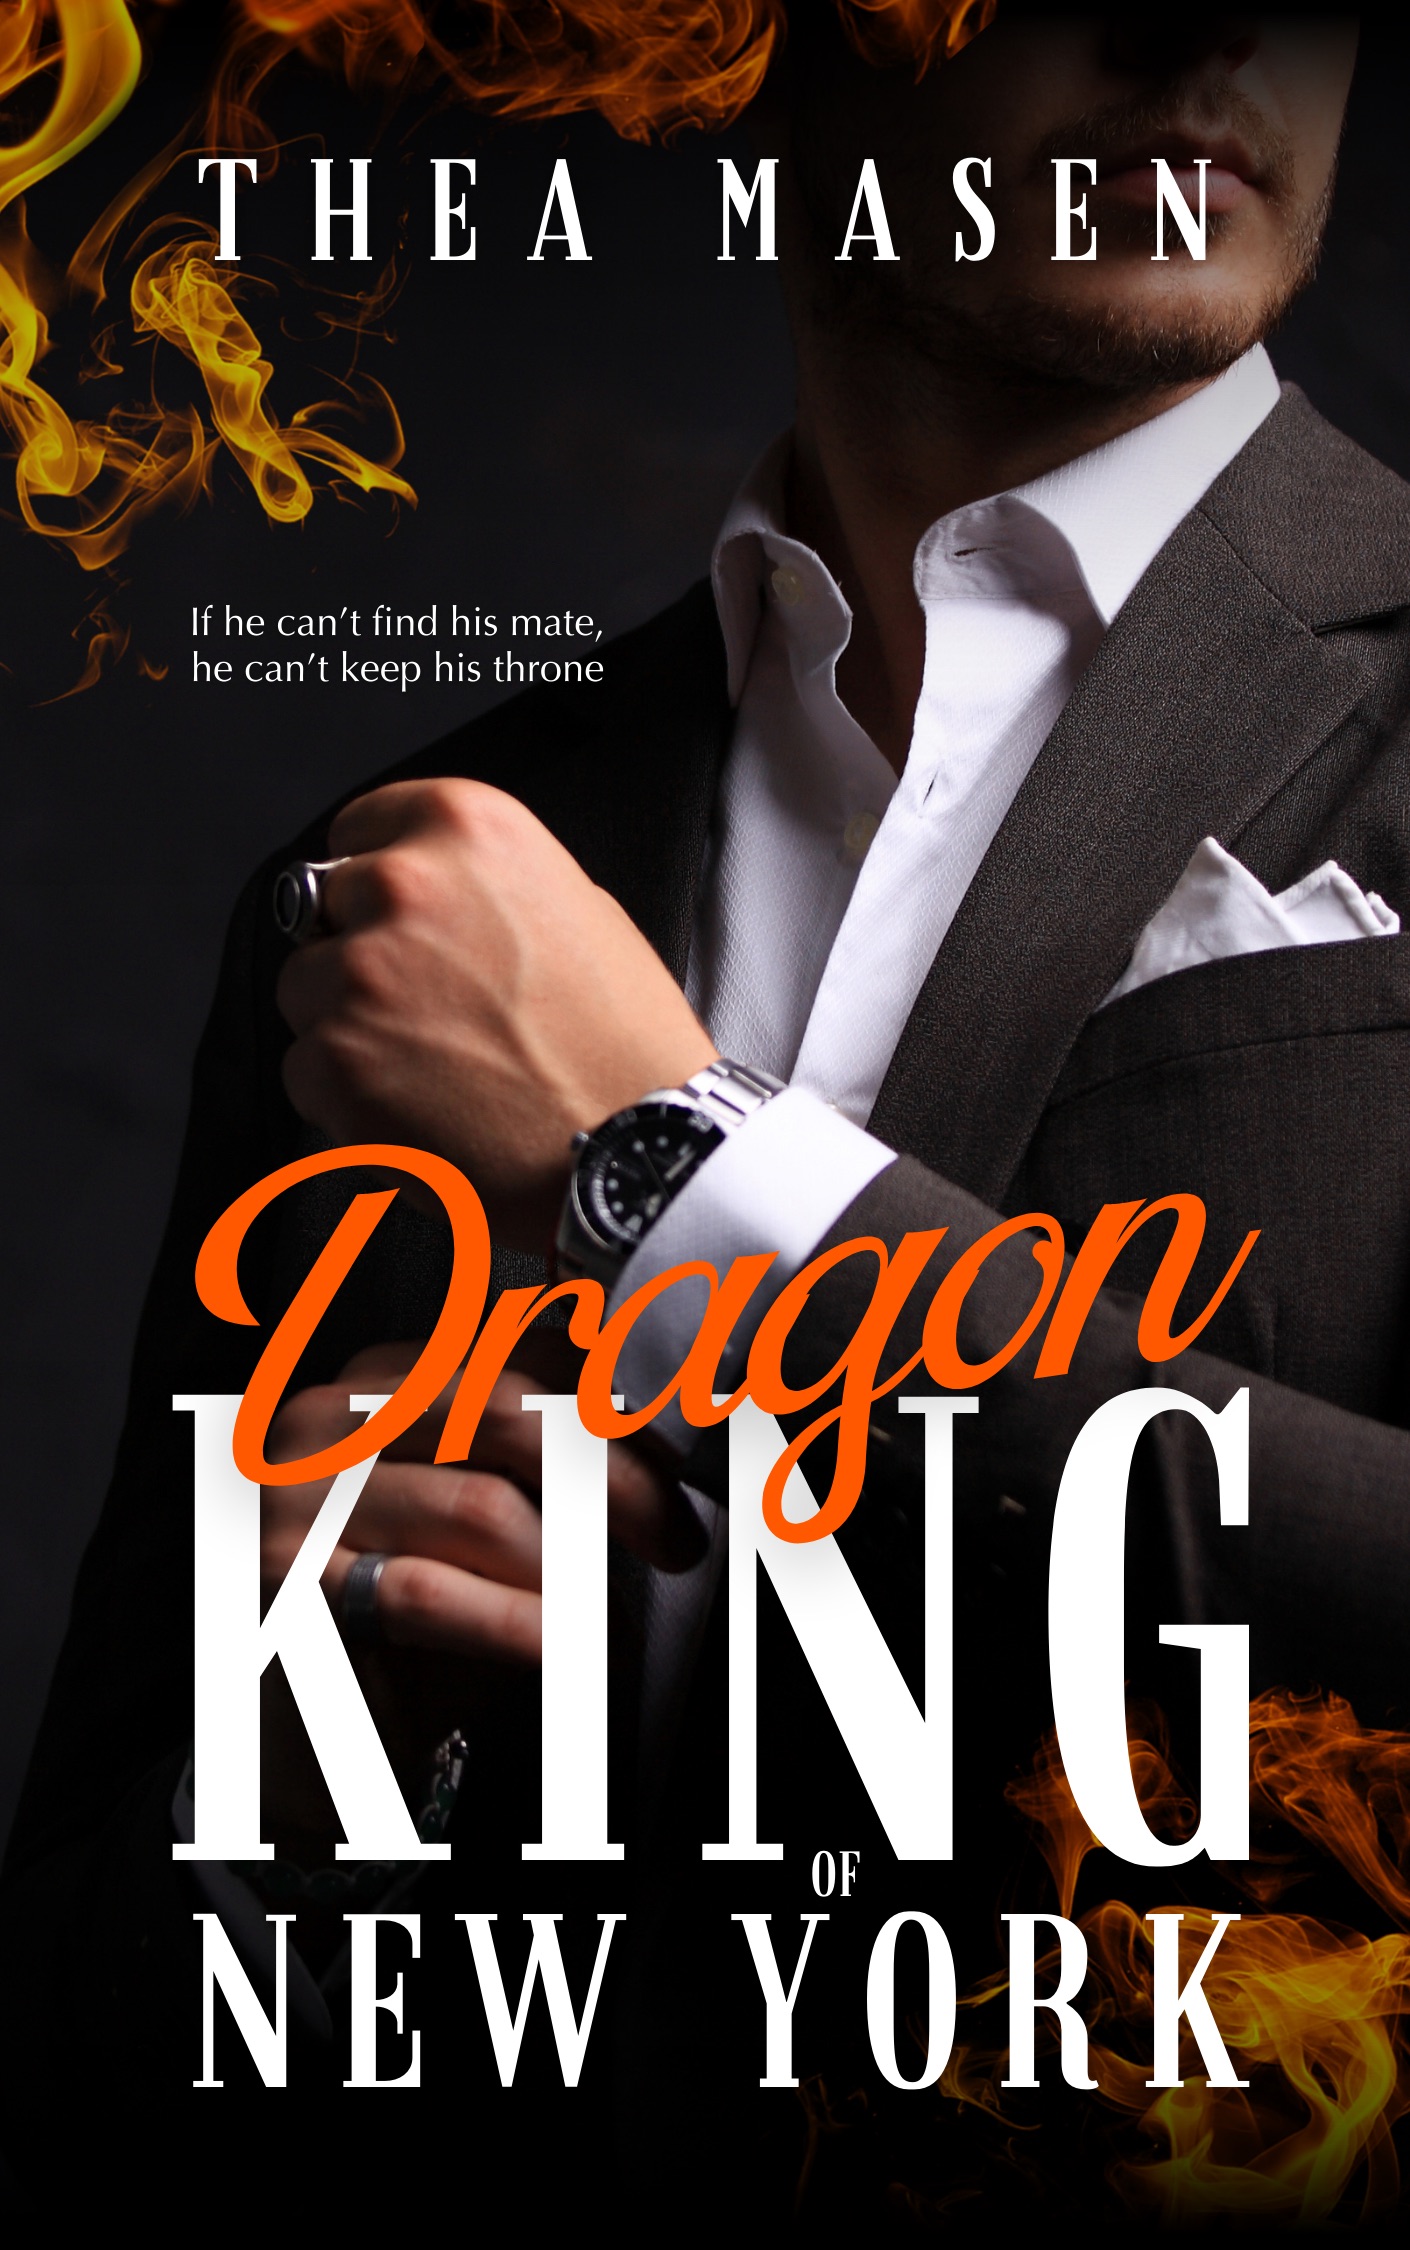 Dragon King of New York book cover